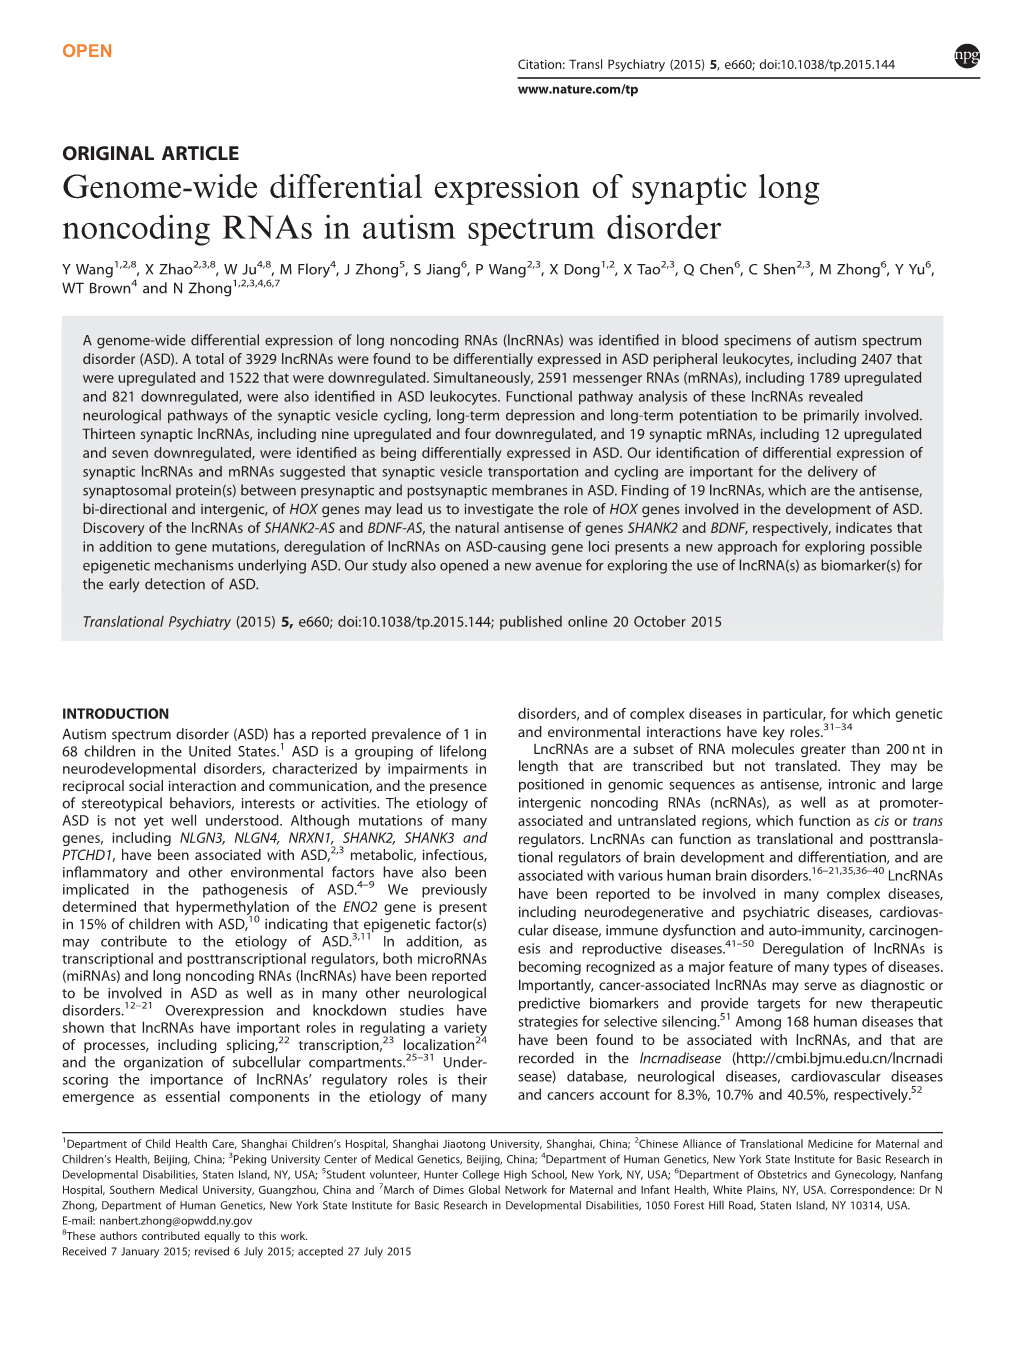 Genome-Wide Differential Expression of Synaptic Long Noncoding Rnas in Autism Spectrum Disorder